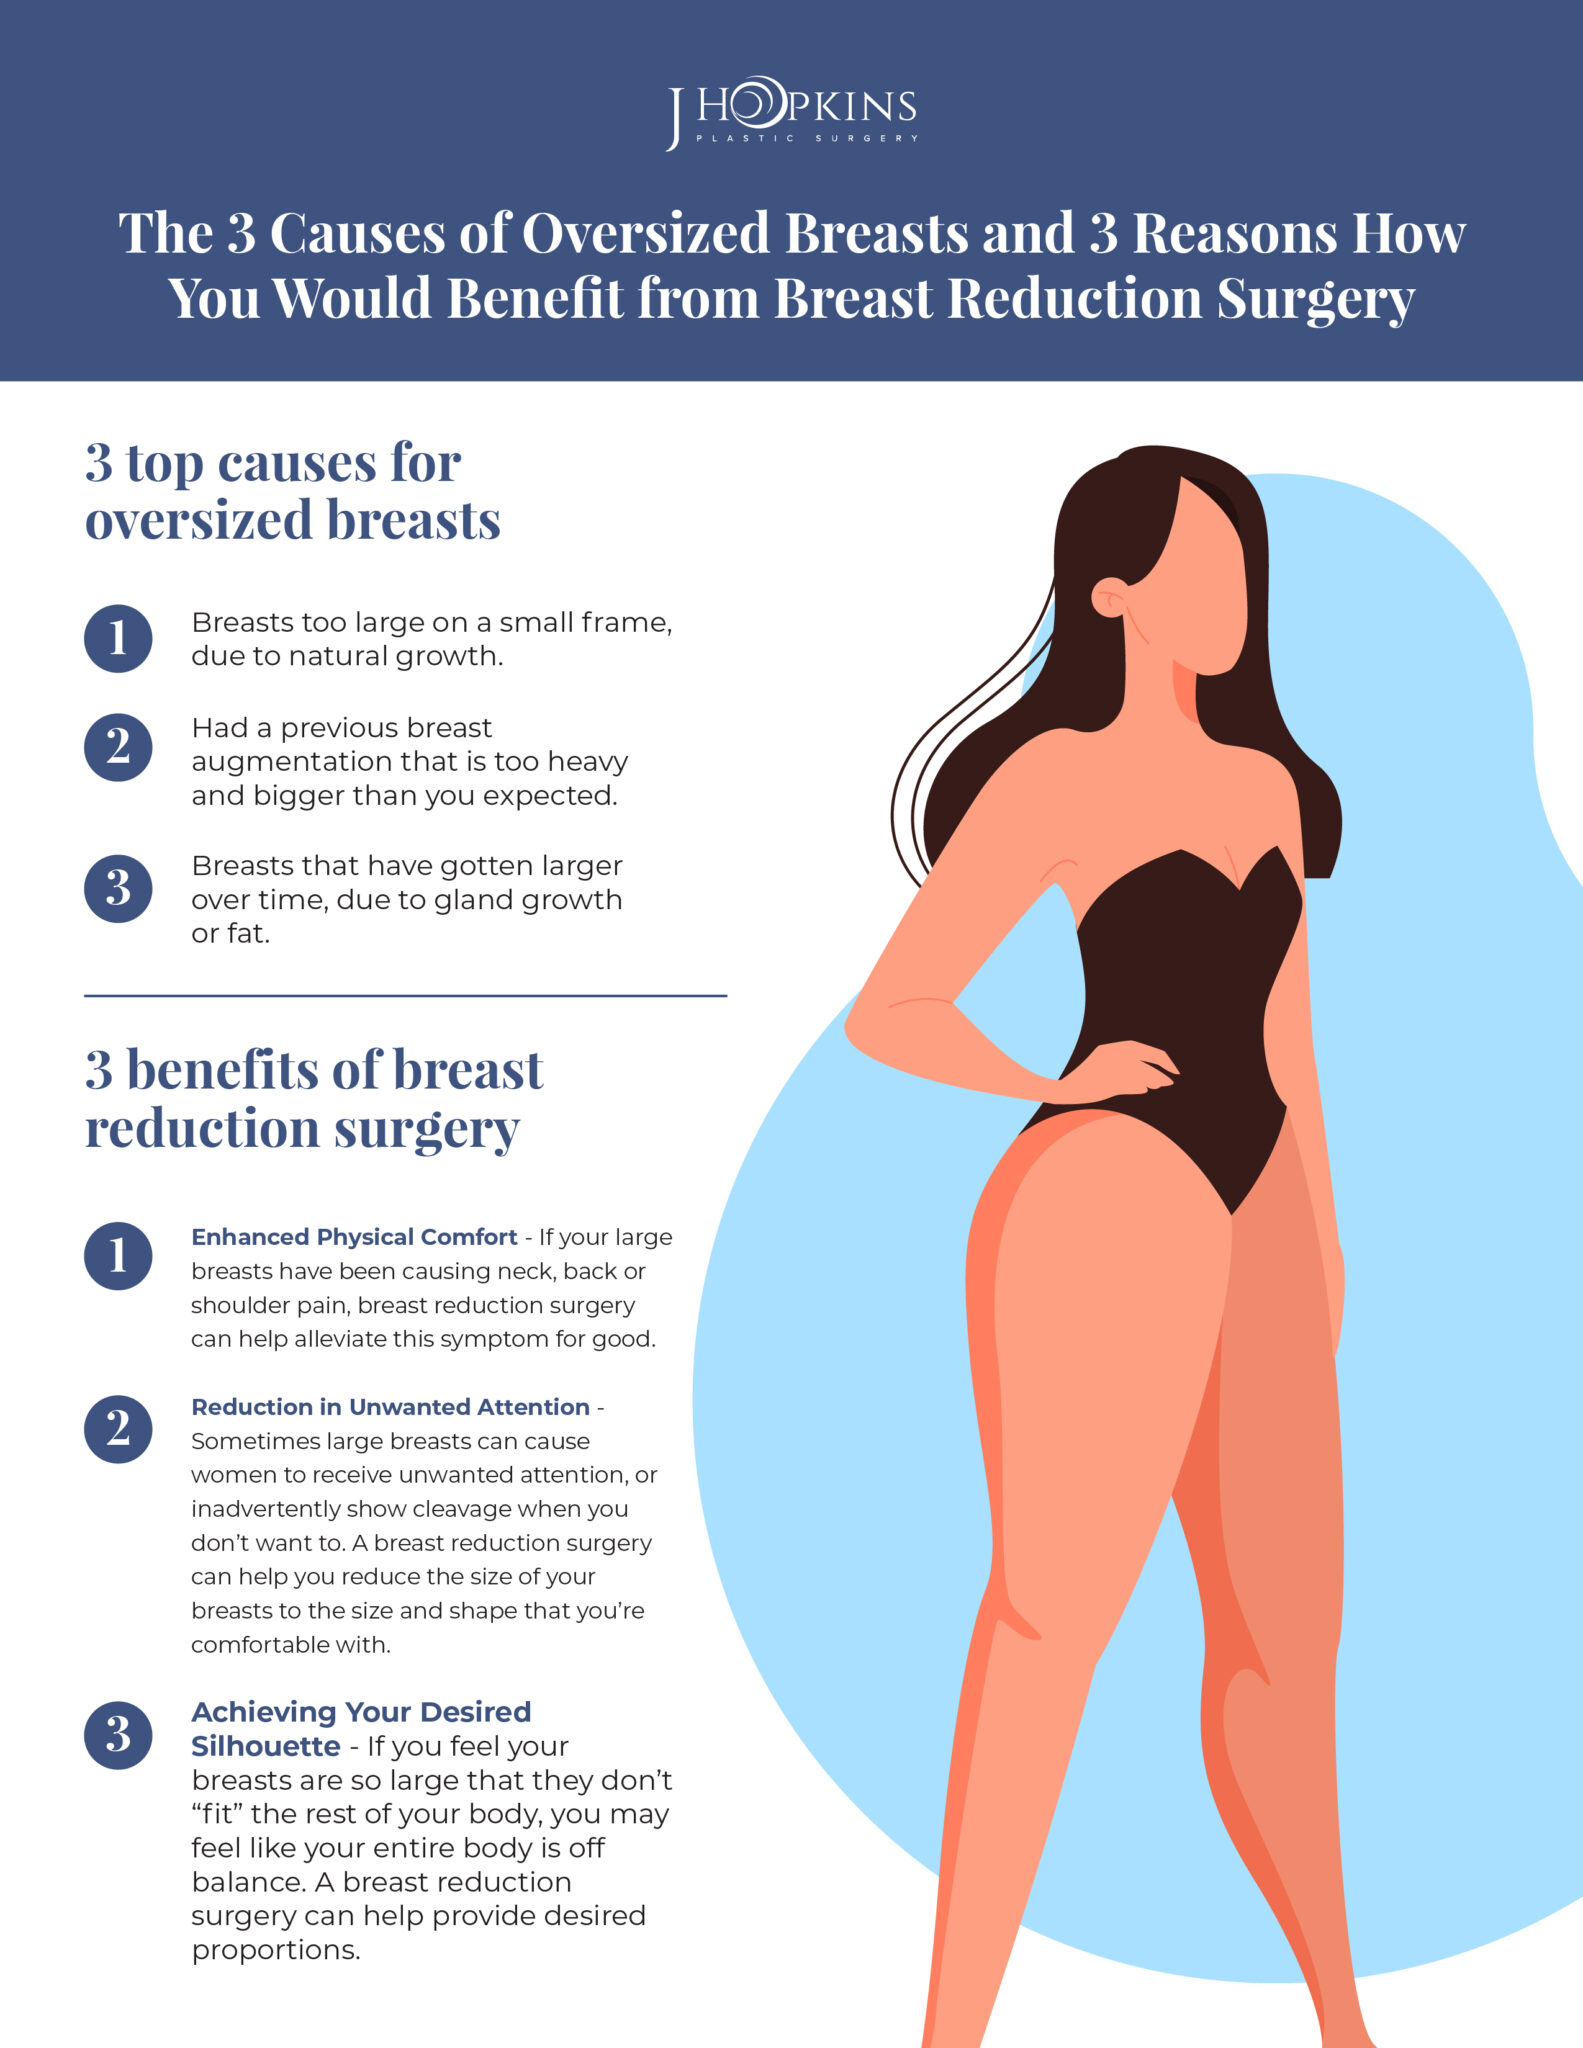 Pros and Cons of Breast Reduction: What Are the Benefits?